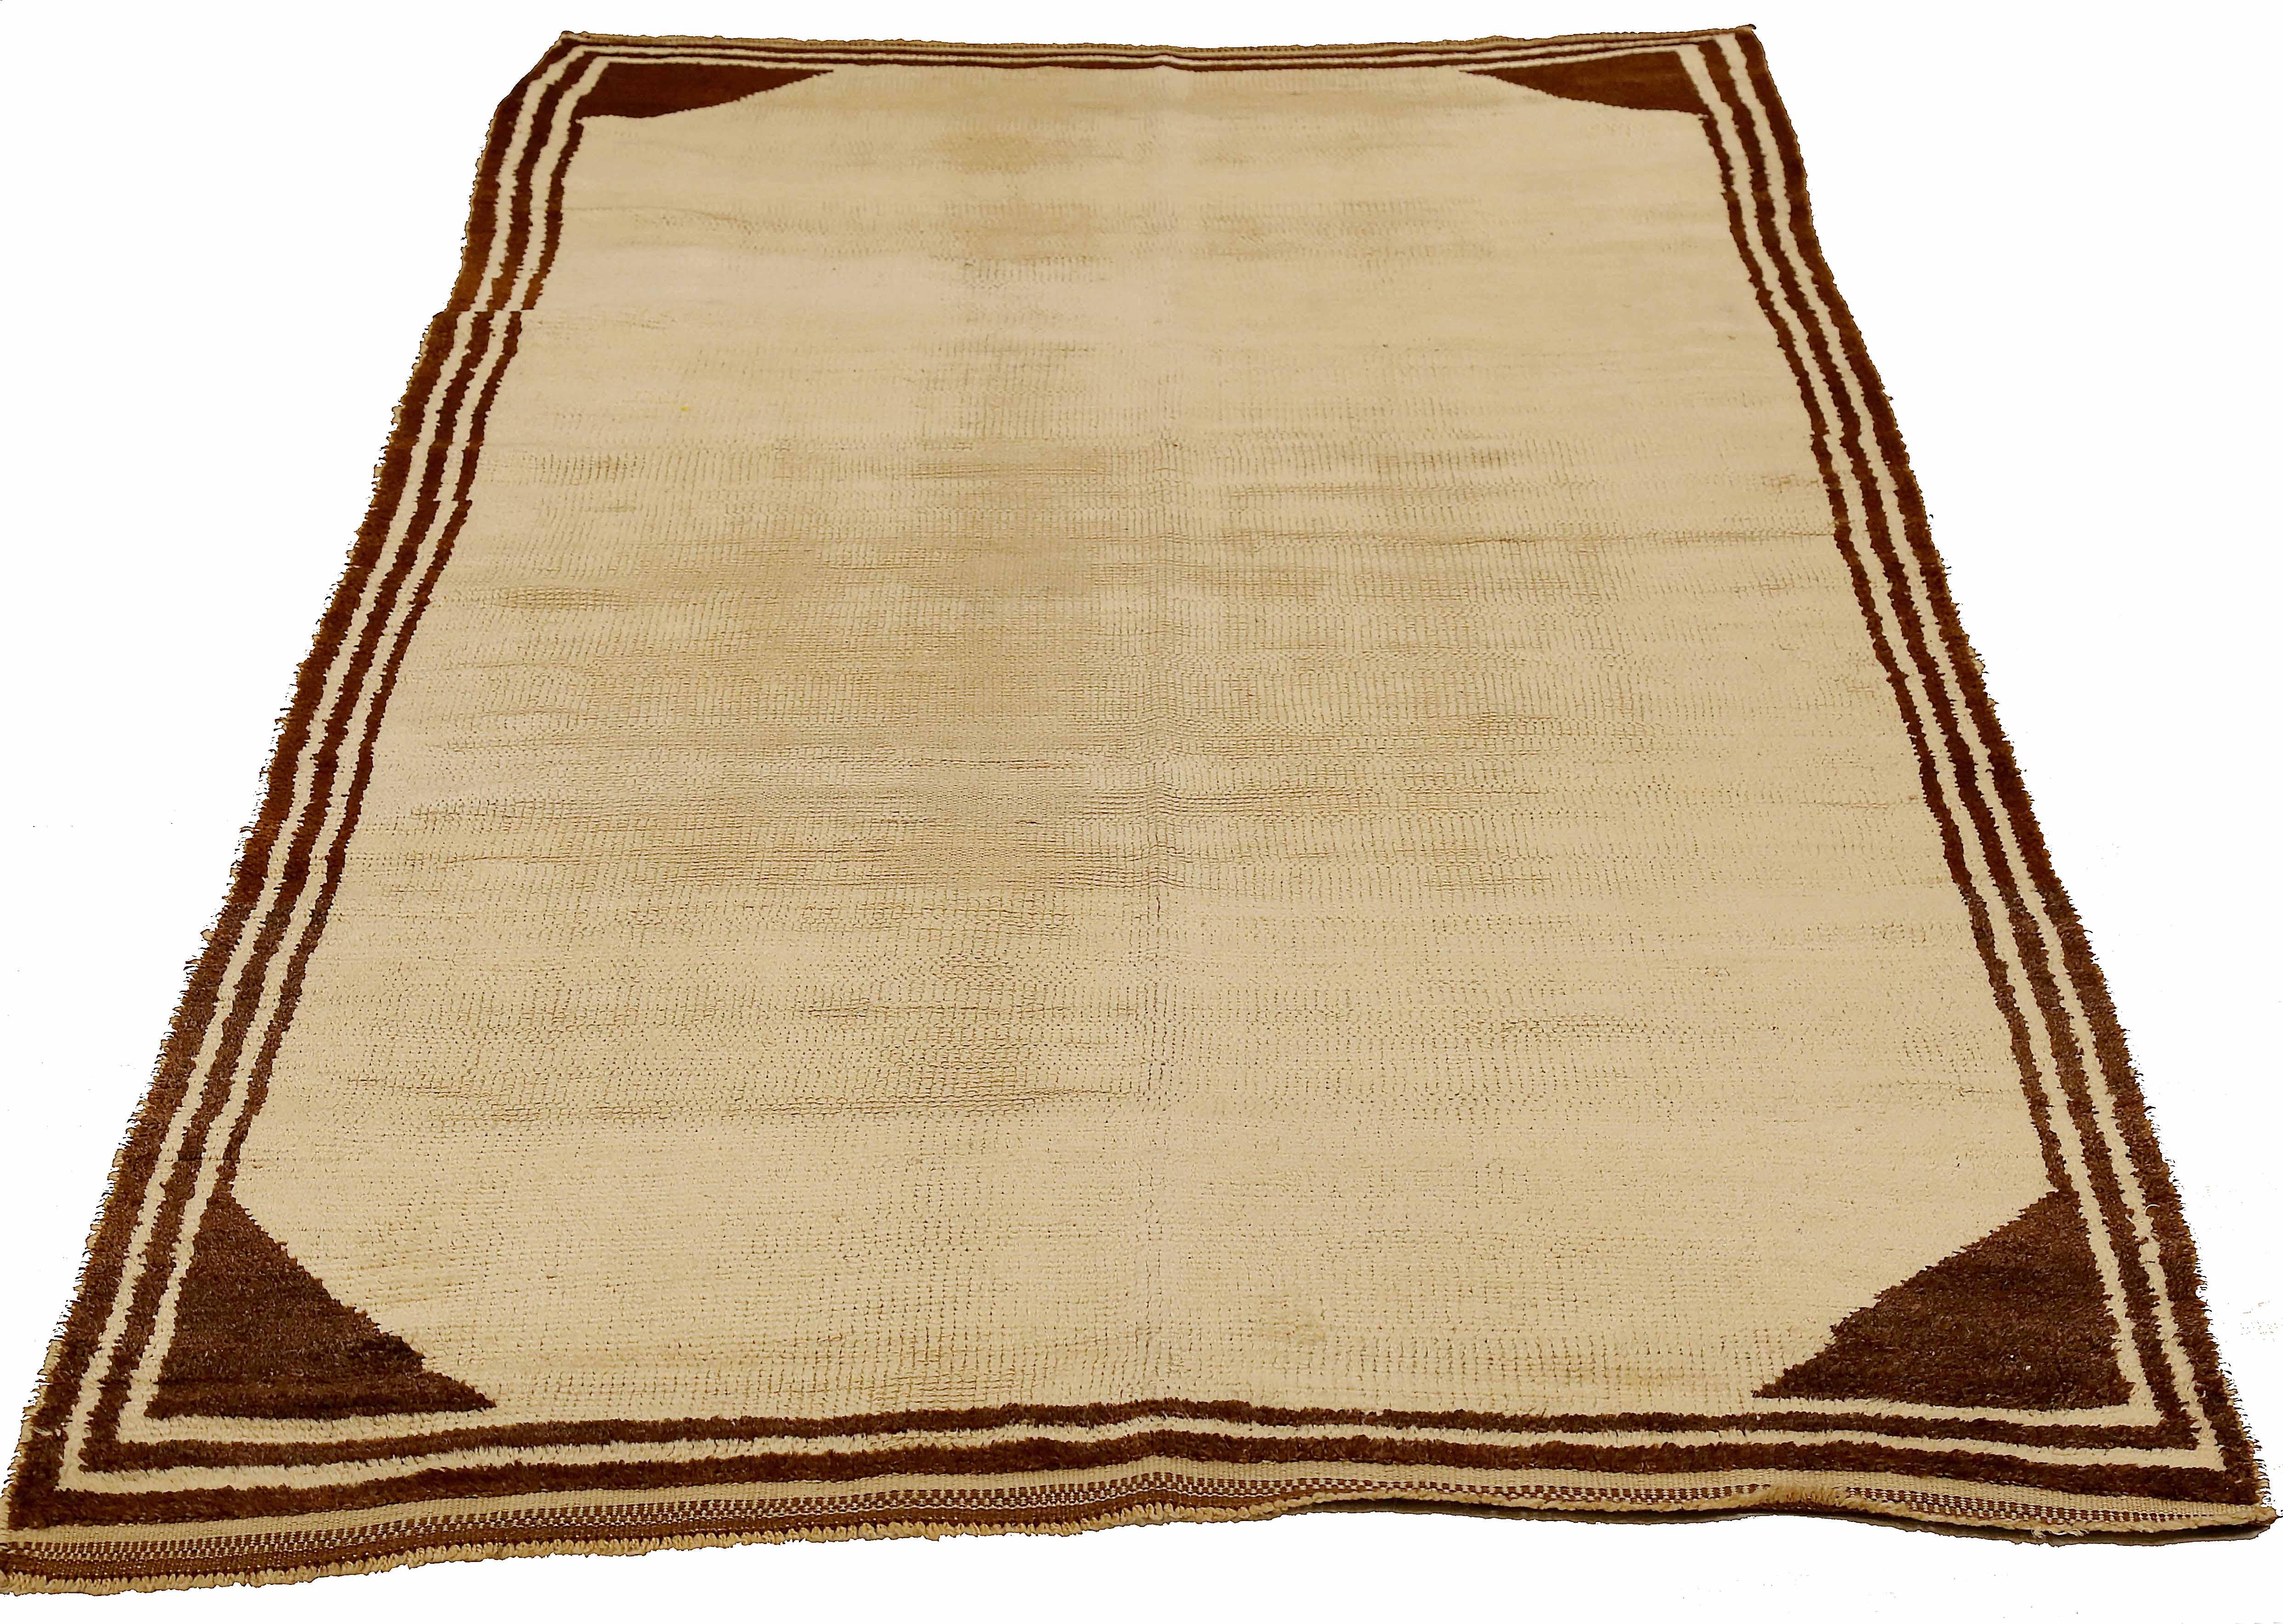 Antique Persian Area Rug, Handwoven with Premium Sheep's Wool, Colored with Natural Vegetable Dyes, Traditional Gabbeh Design, Master Artisan Craftsmanship, Versatile Home Interior Design, Small Dimension 4'1